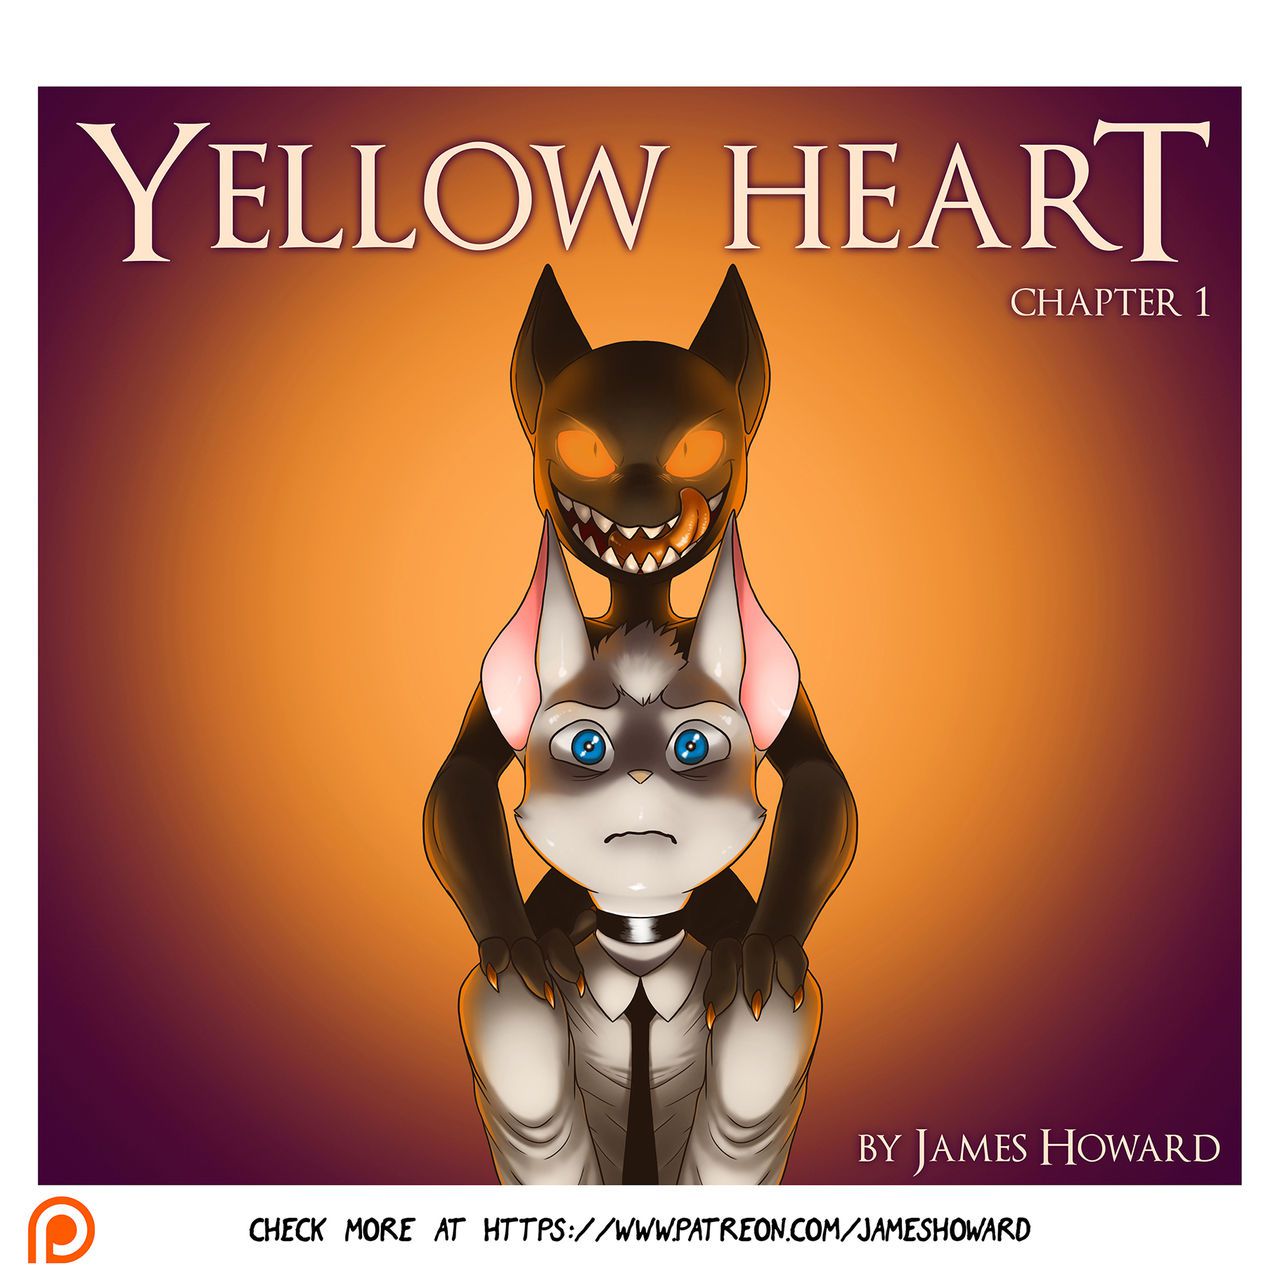 [James Howard] Yellow Heart 01 - regular pages(ongoing) 5